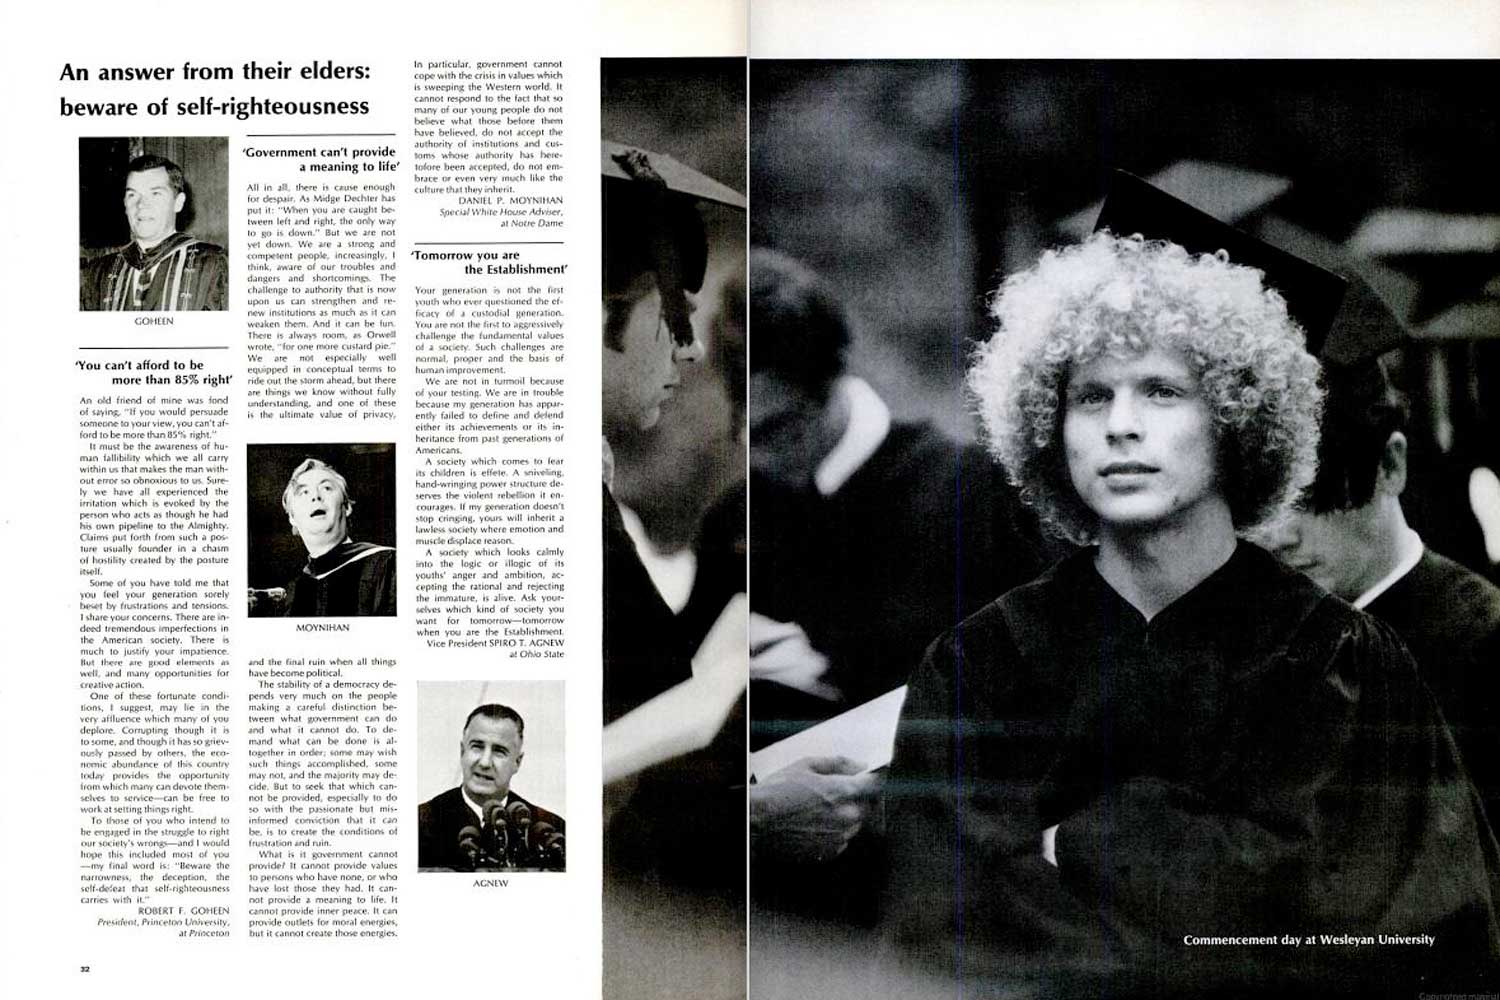 LIFE magazine, June 20, 1969, "Class of '69" page spreads. (Best viewed using "Full Screen" option, at right.)